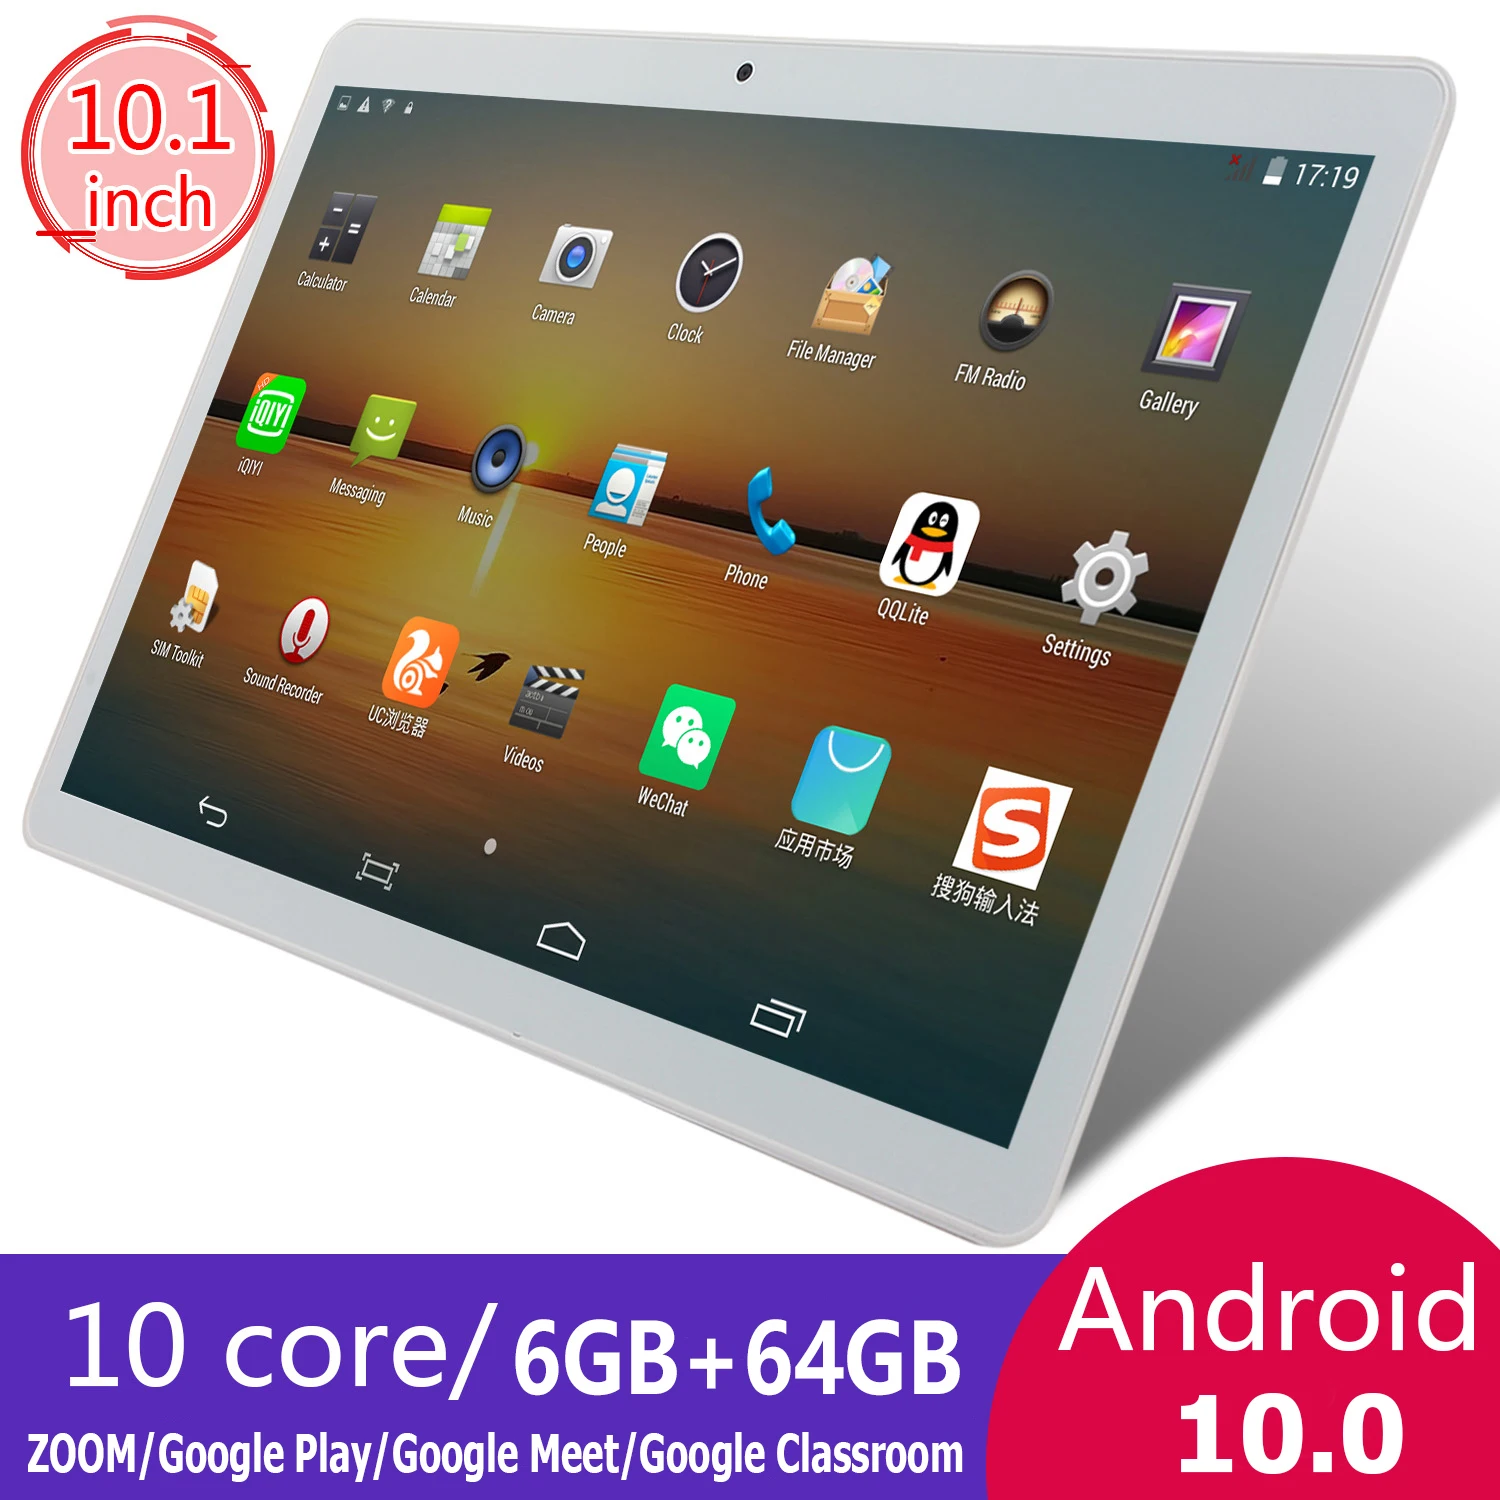 KIVBWY New 10 inch tablet Pc Octa Core 4G Phone Call Google Market GPS WiFi FM Bluetooth 10.1 Tablets 6G+64G Android 10.0 tab